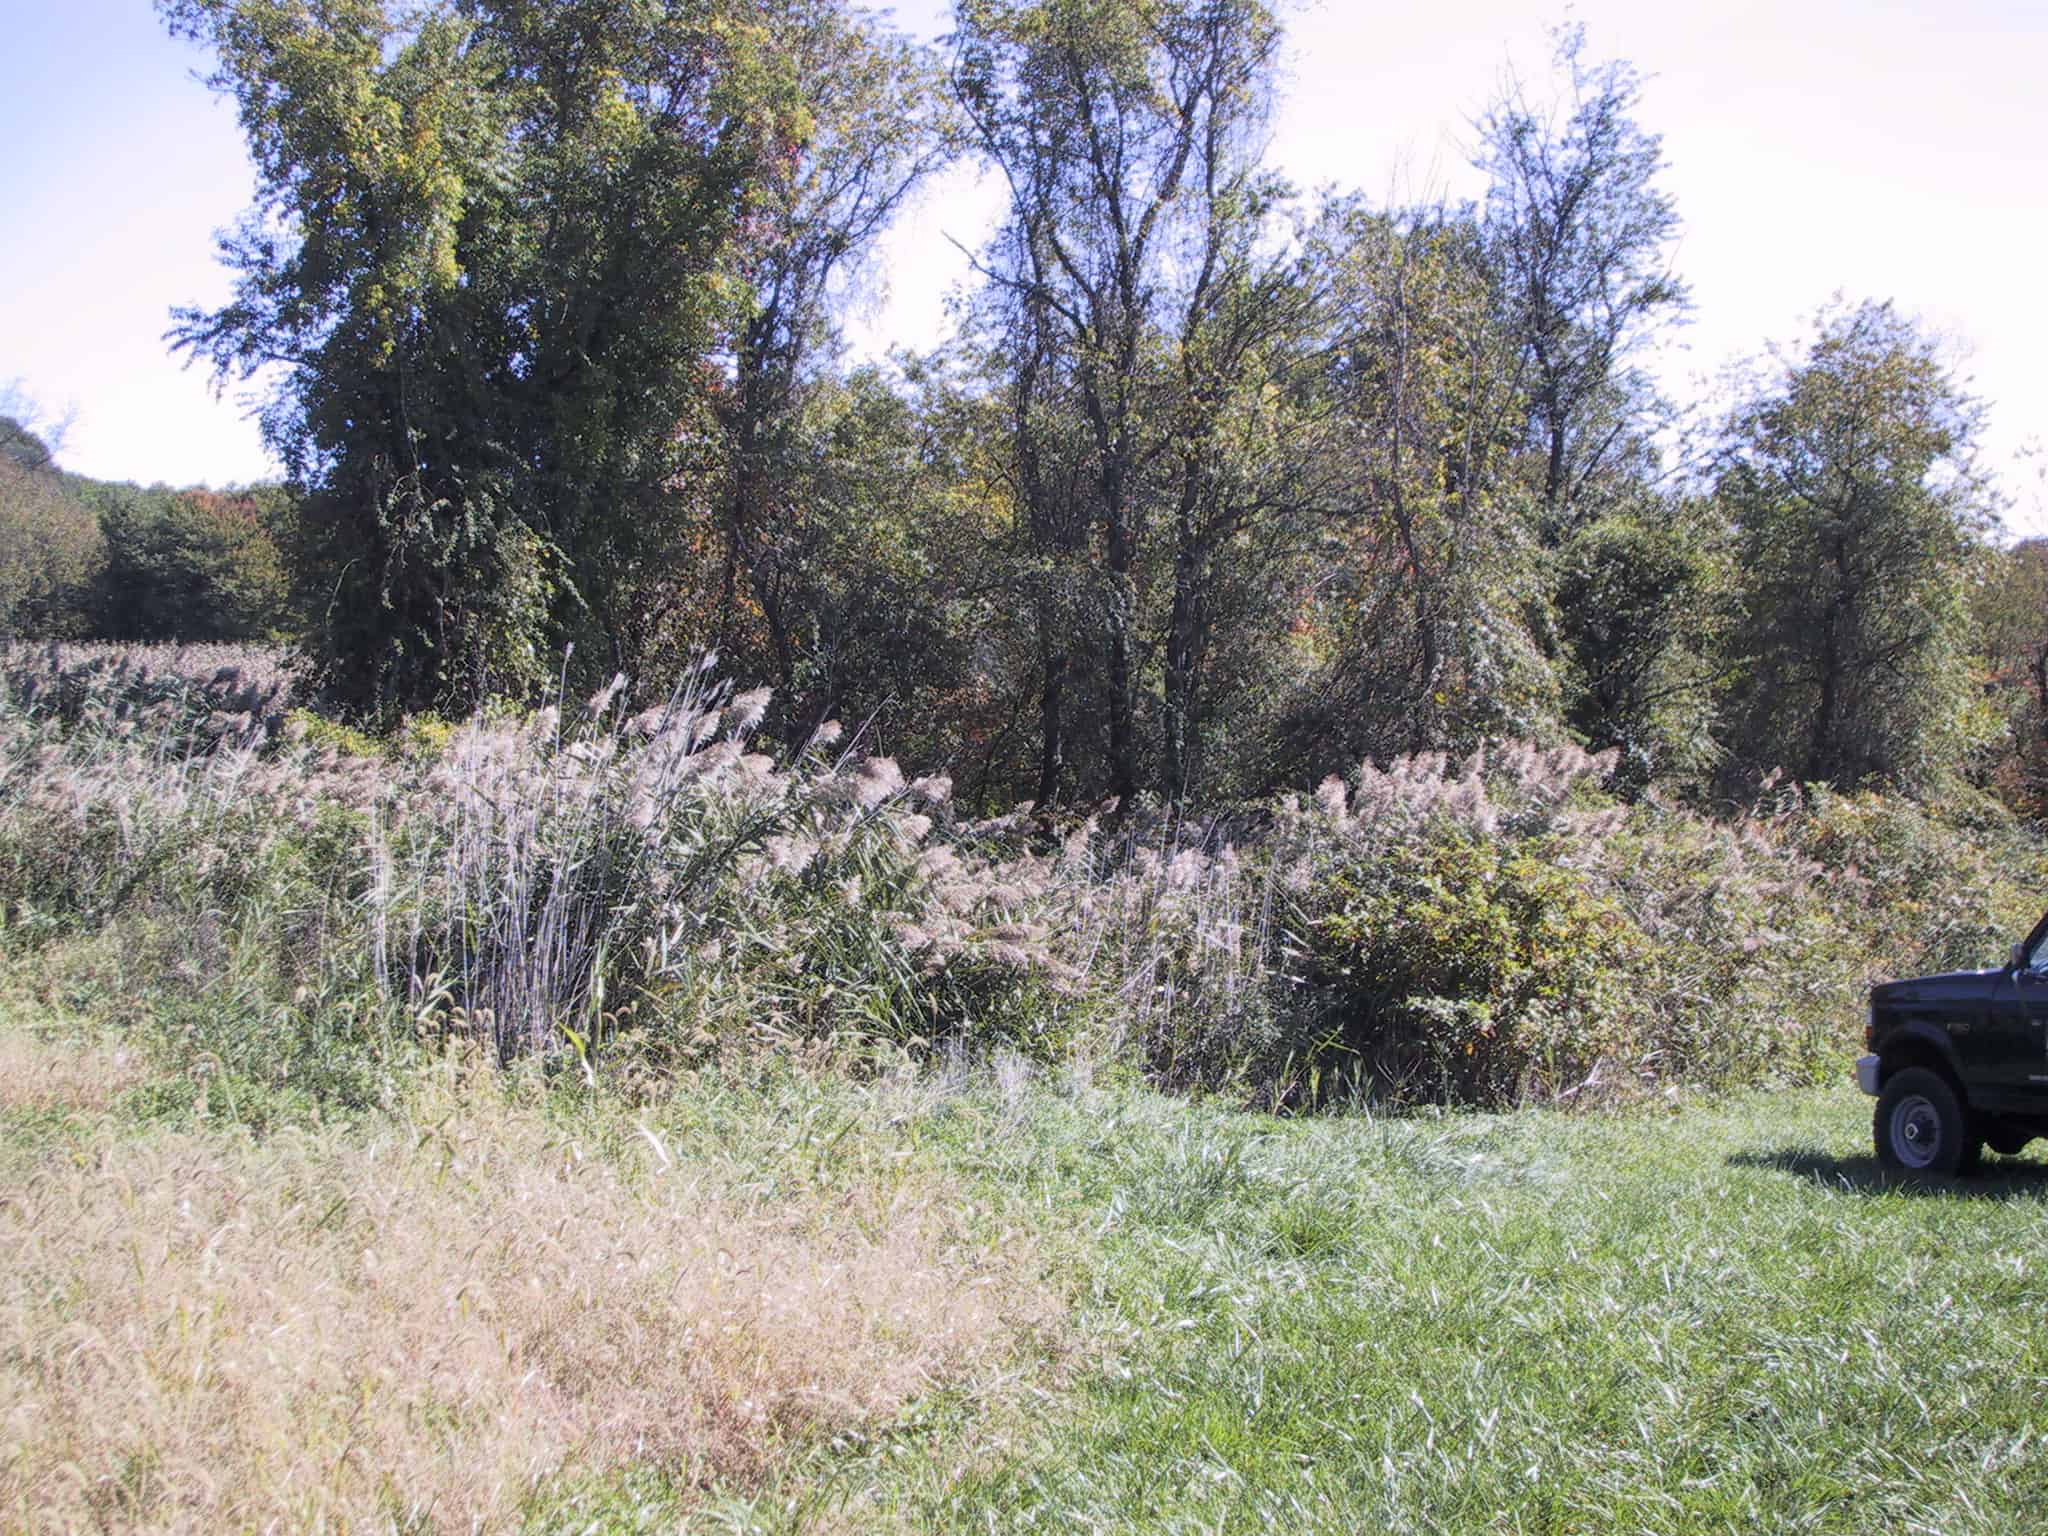 A patch of invasive giant reed in 2002